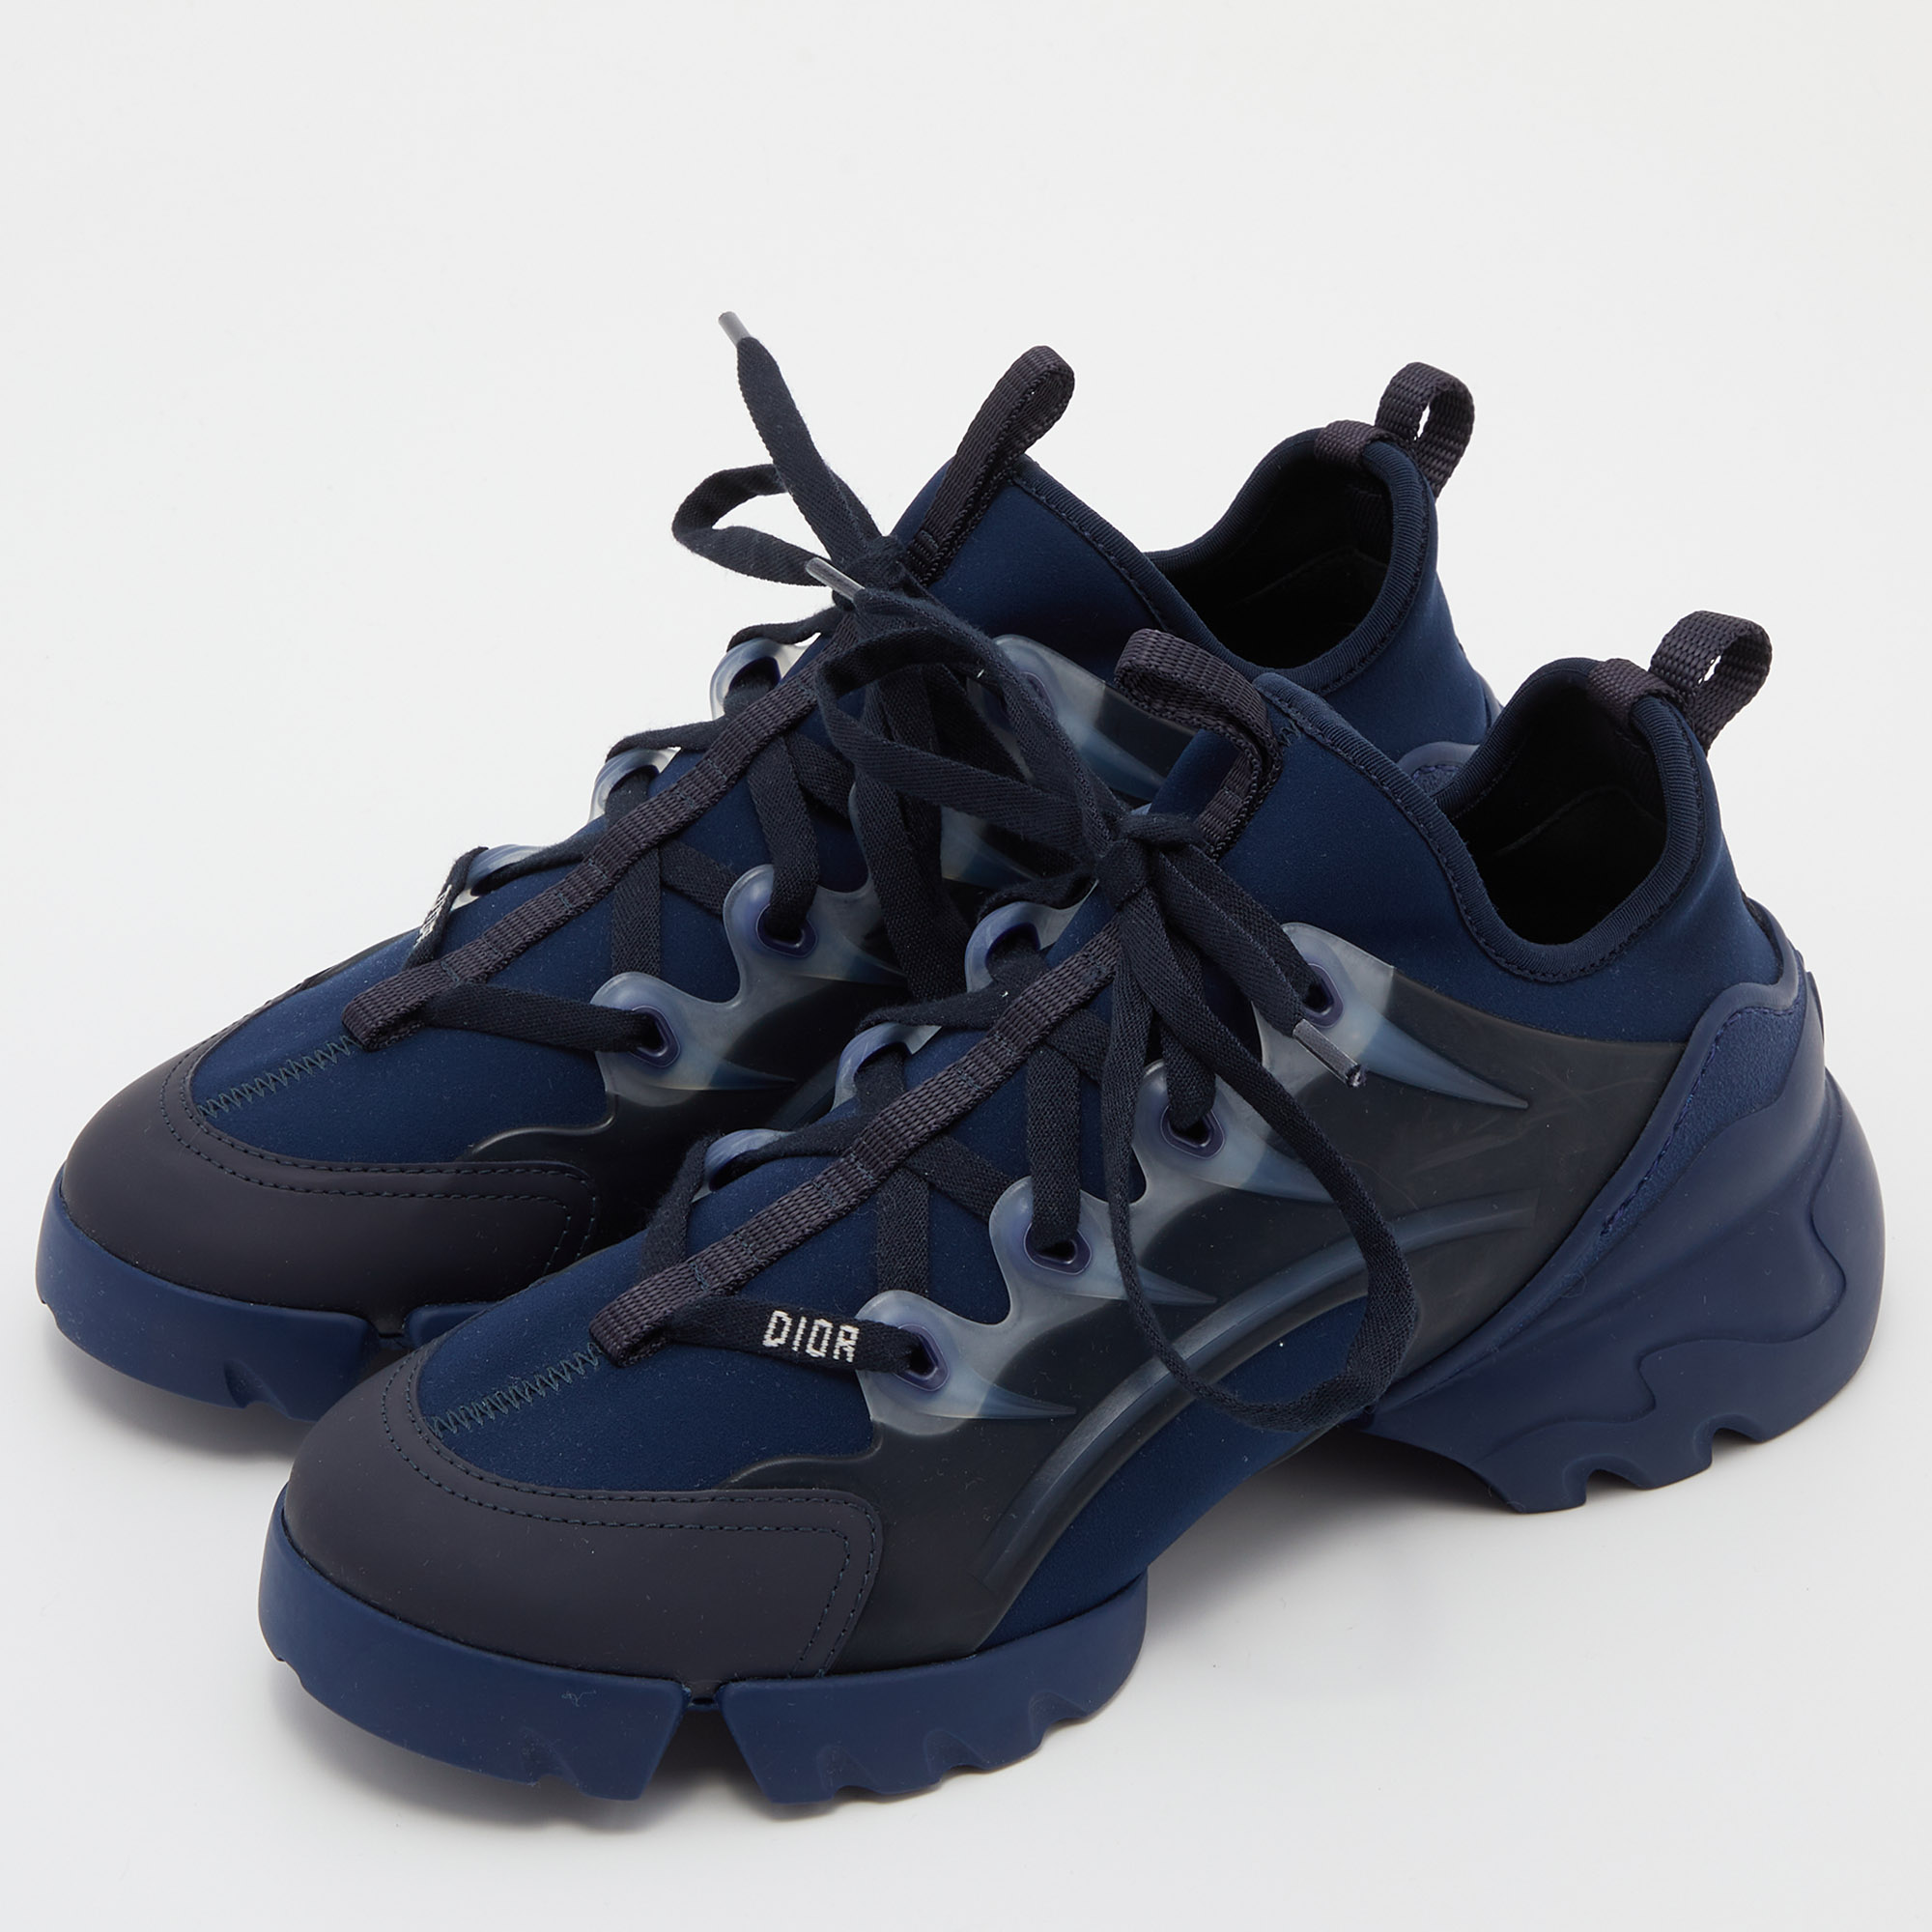 

Dior Navy Blue/Black Neoprene and Leather D-Connect Sneakers Size